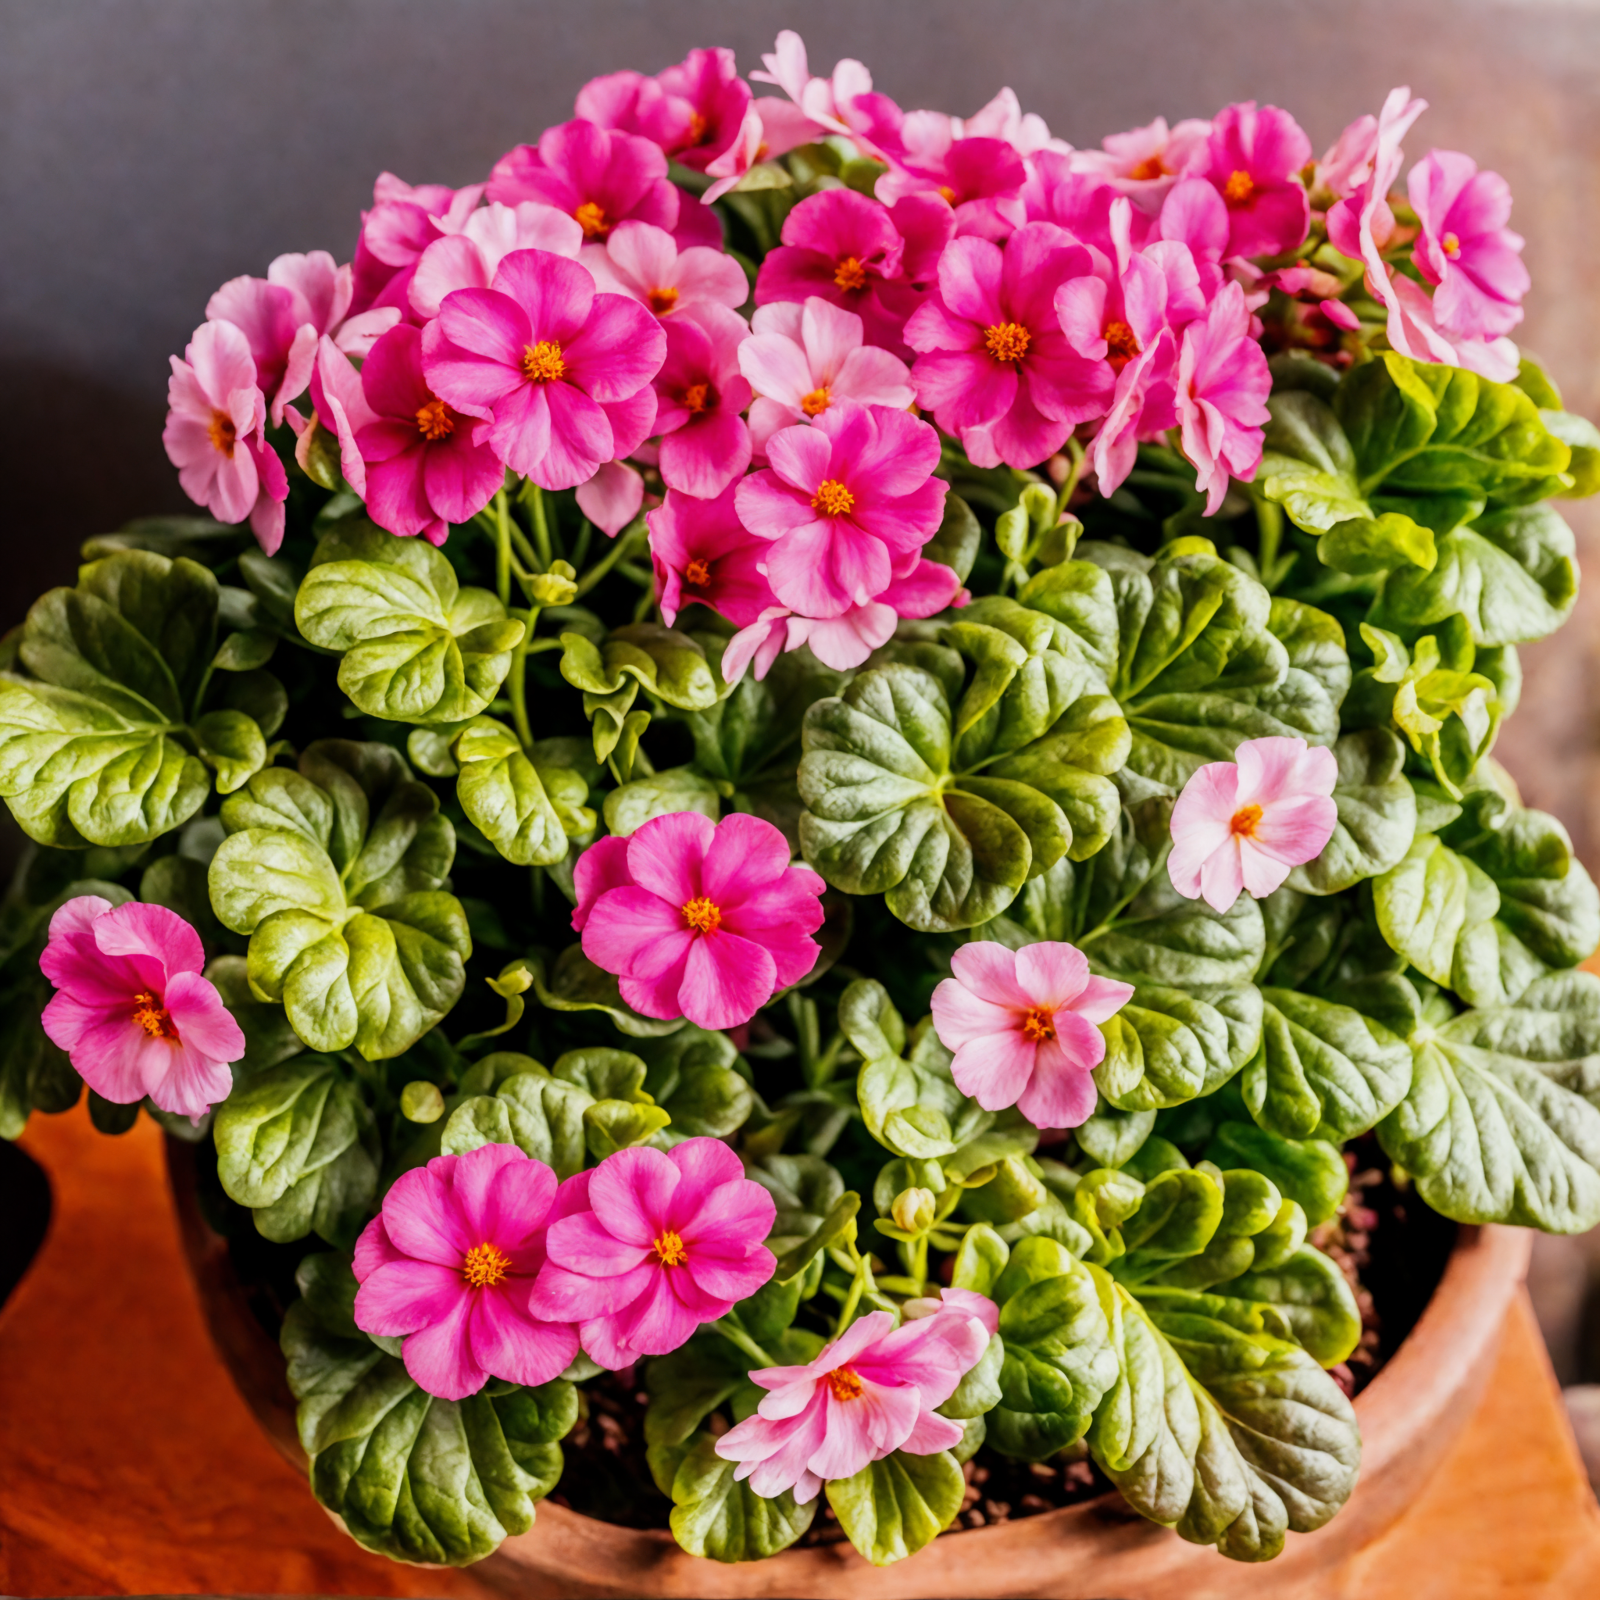 Primula obconica with pink blooms in a wooden bowl, clear lighting, against a dark background.